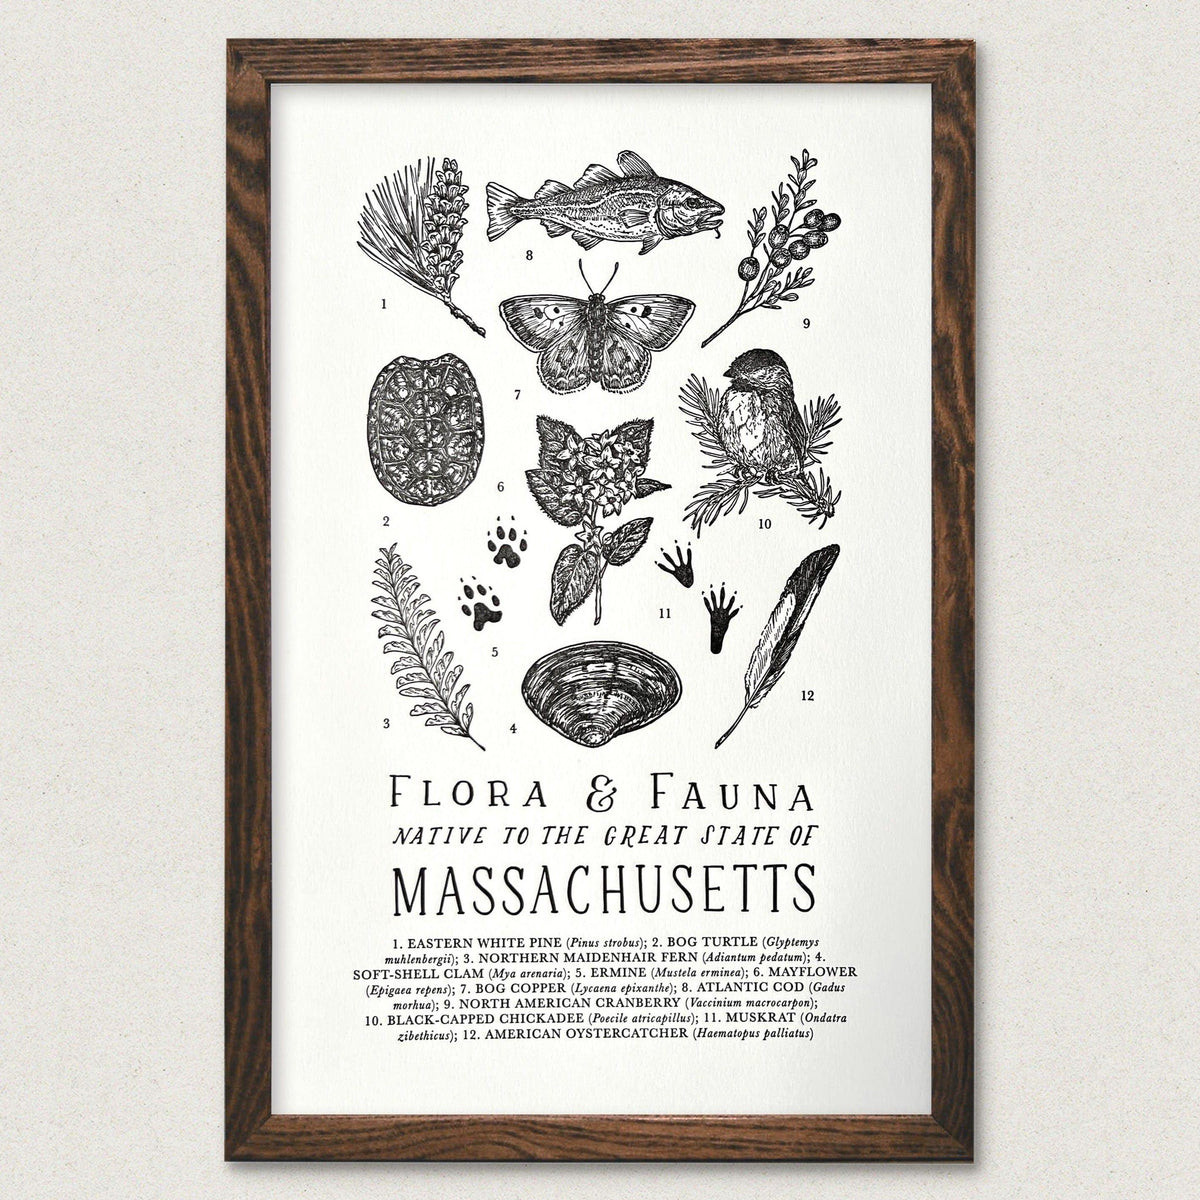 Massachusetts Field Guide Letterpress Print featuring plants and animals, by The Wild Wander.